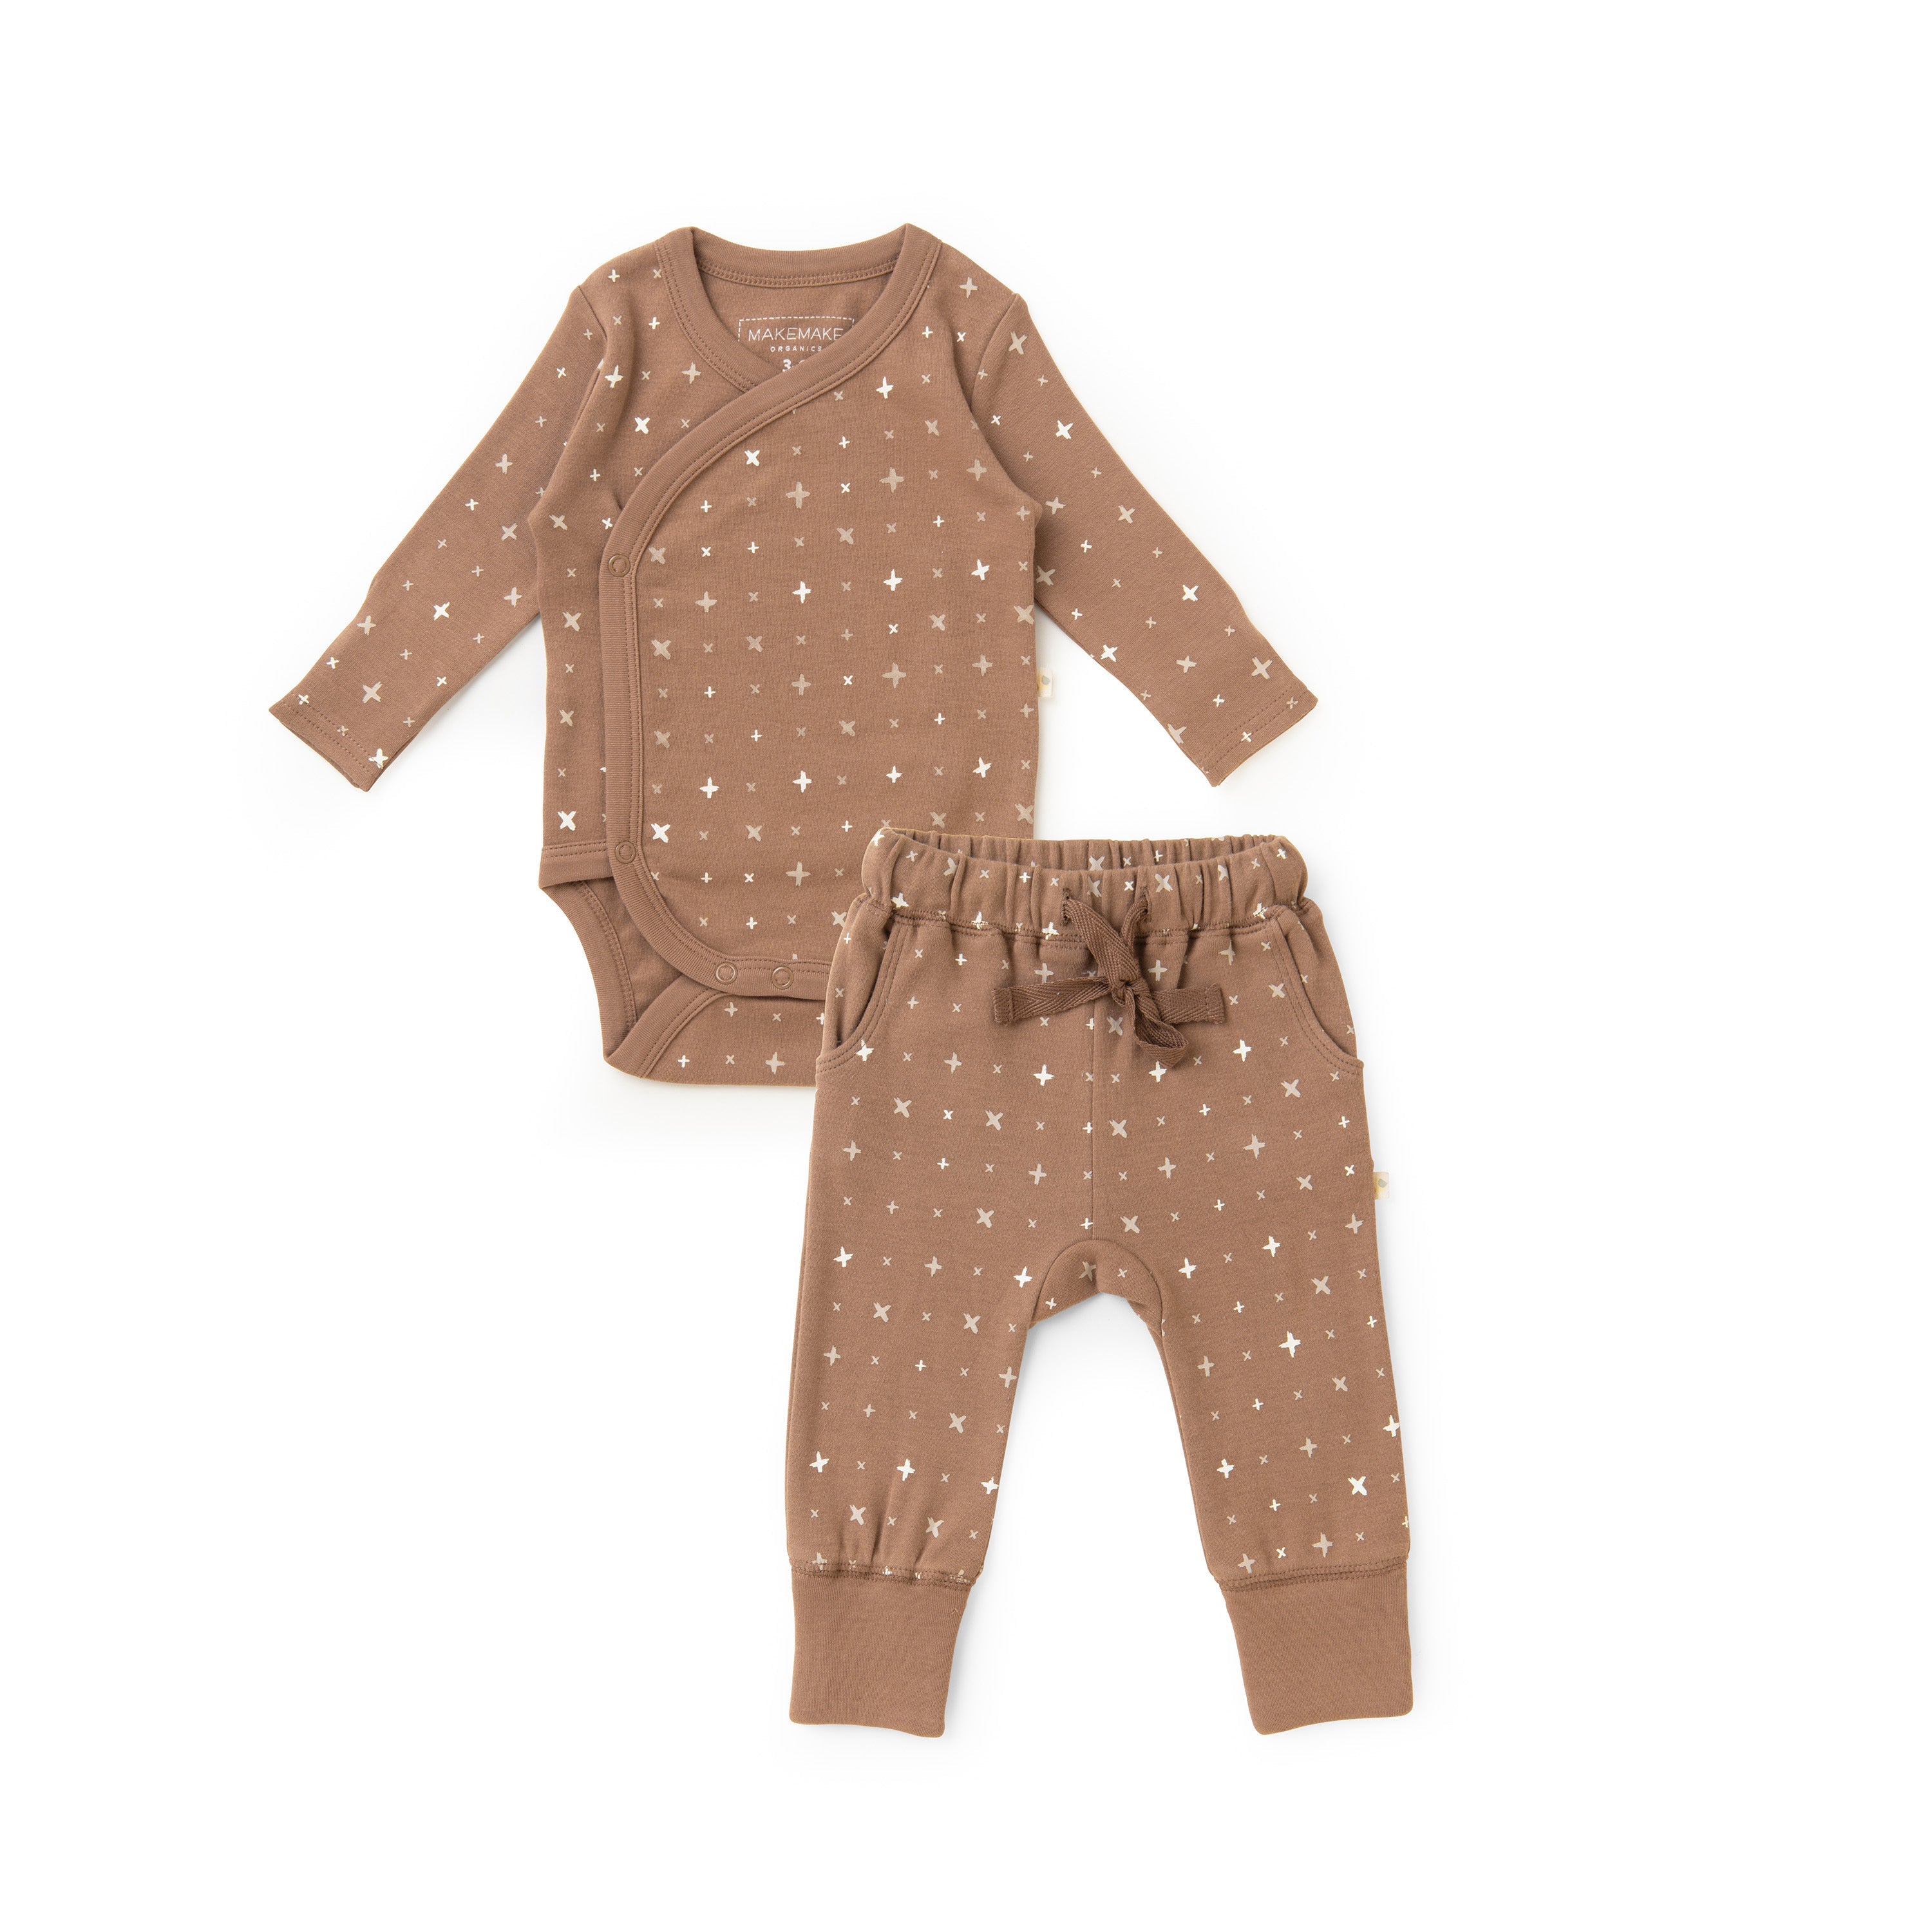 A Organic Baby beige Kimono Onesie & Pants Set - Sparkle with white star print, laid flat on a white background. The onesie has long sleeves and snaps on the side, while the pants.